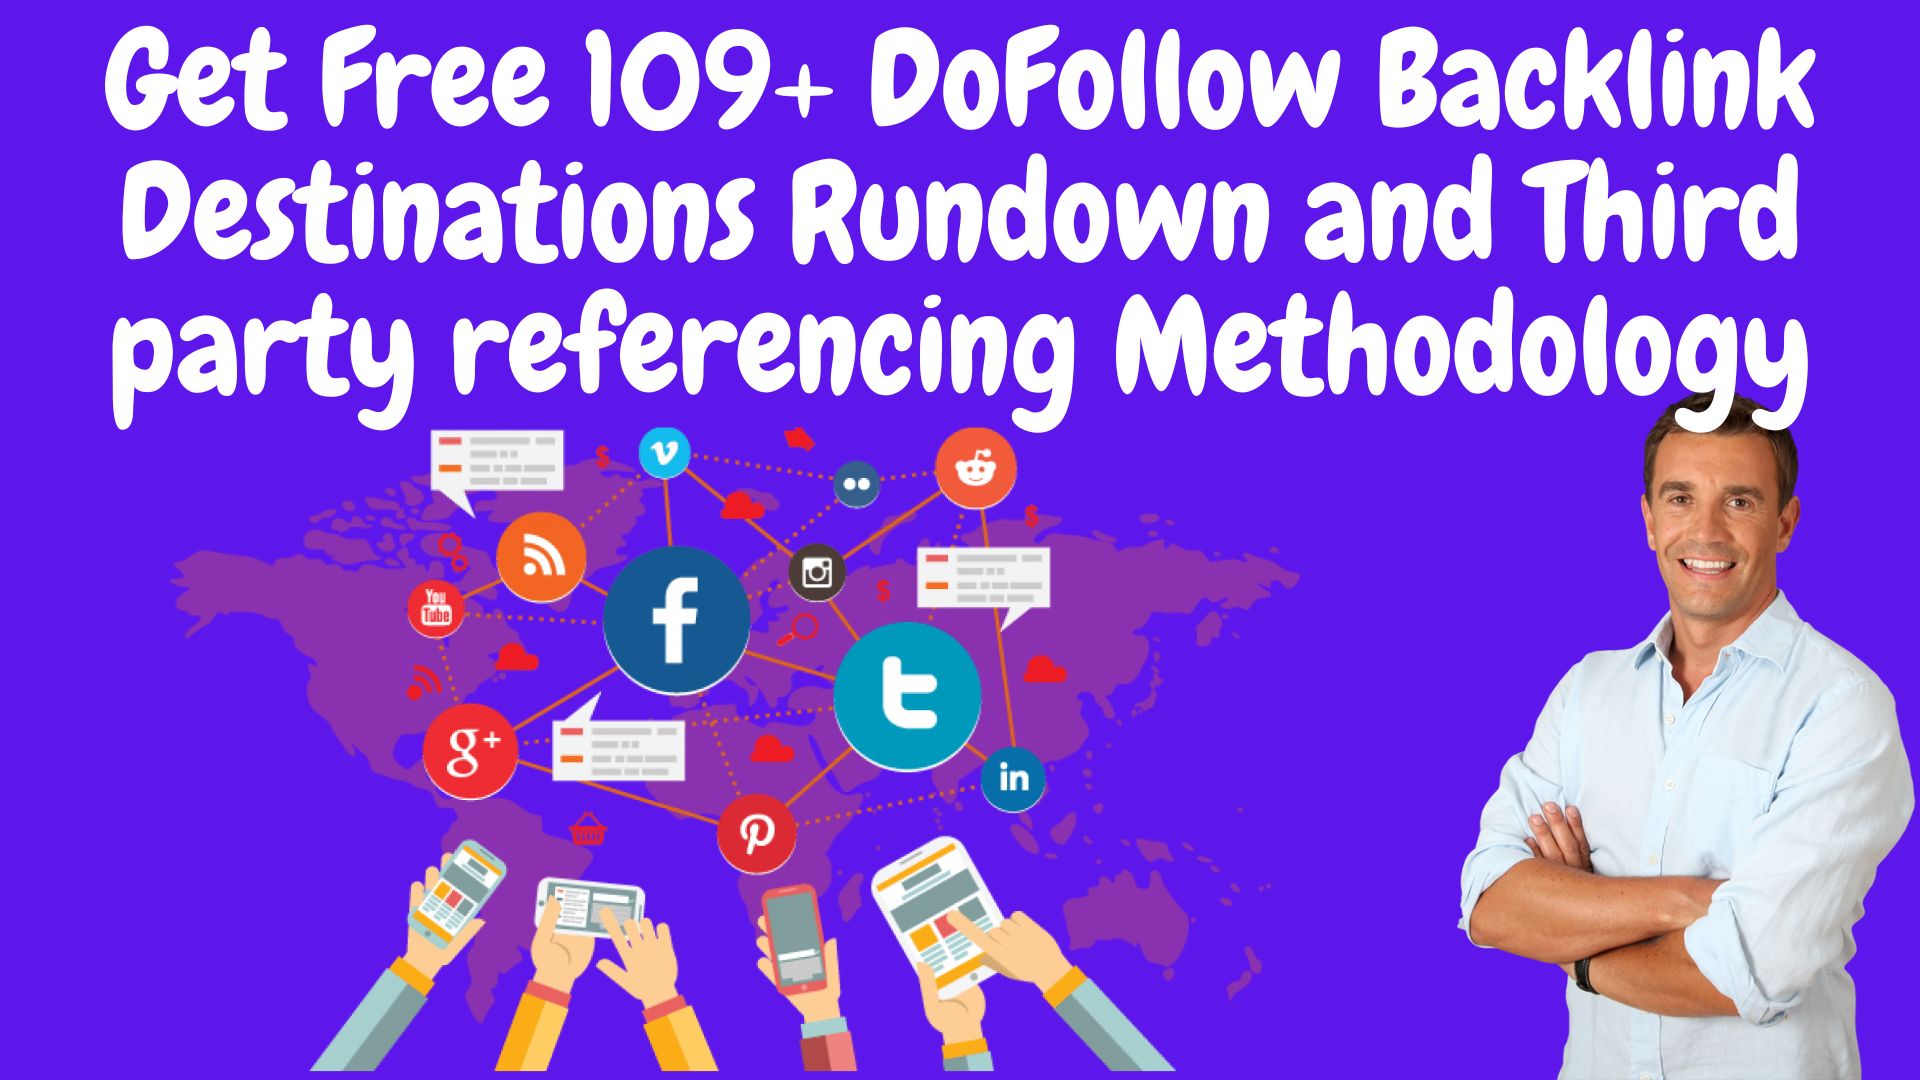 Get Free 109+ Dofollow Backlink Destinations Rundown And Third Party Referencing Methodology